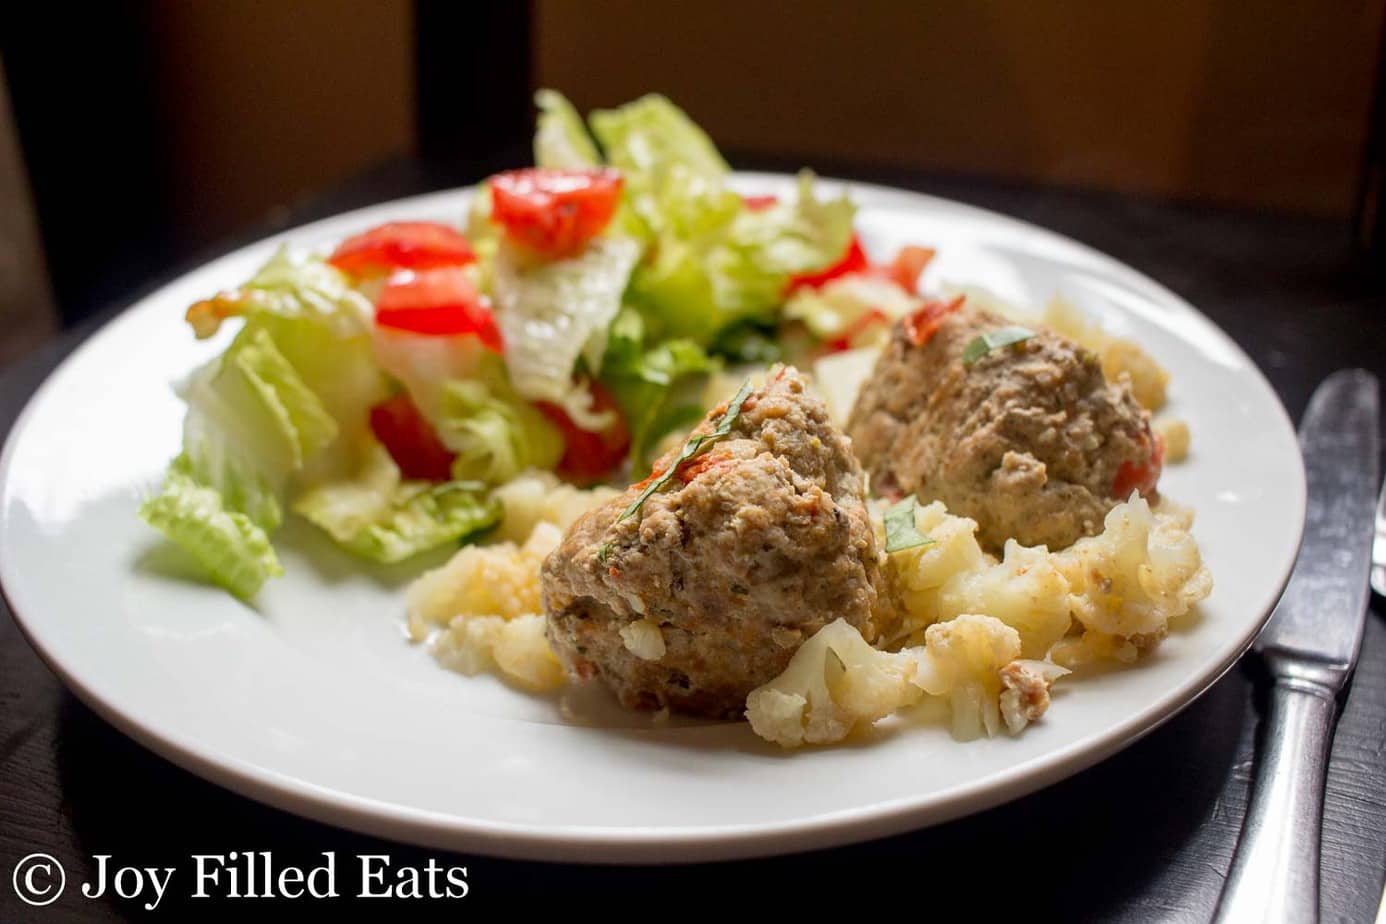 plate with skillet basil & tomato meatballs served over cauliflower with a green salad